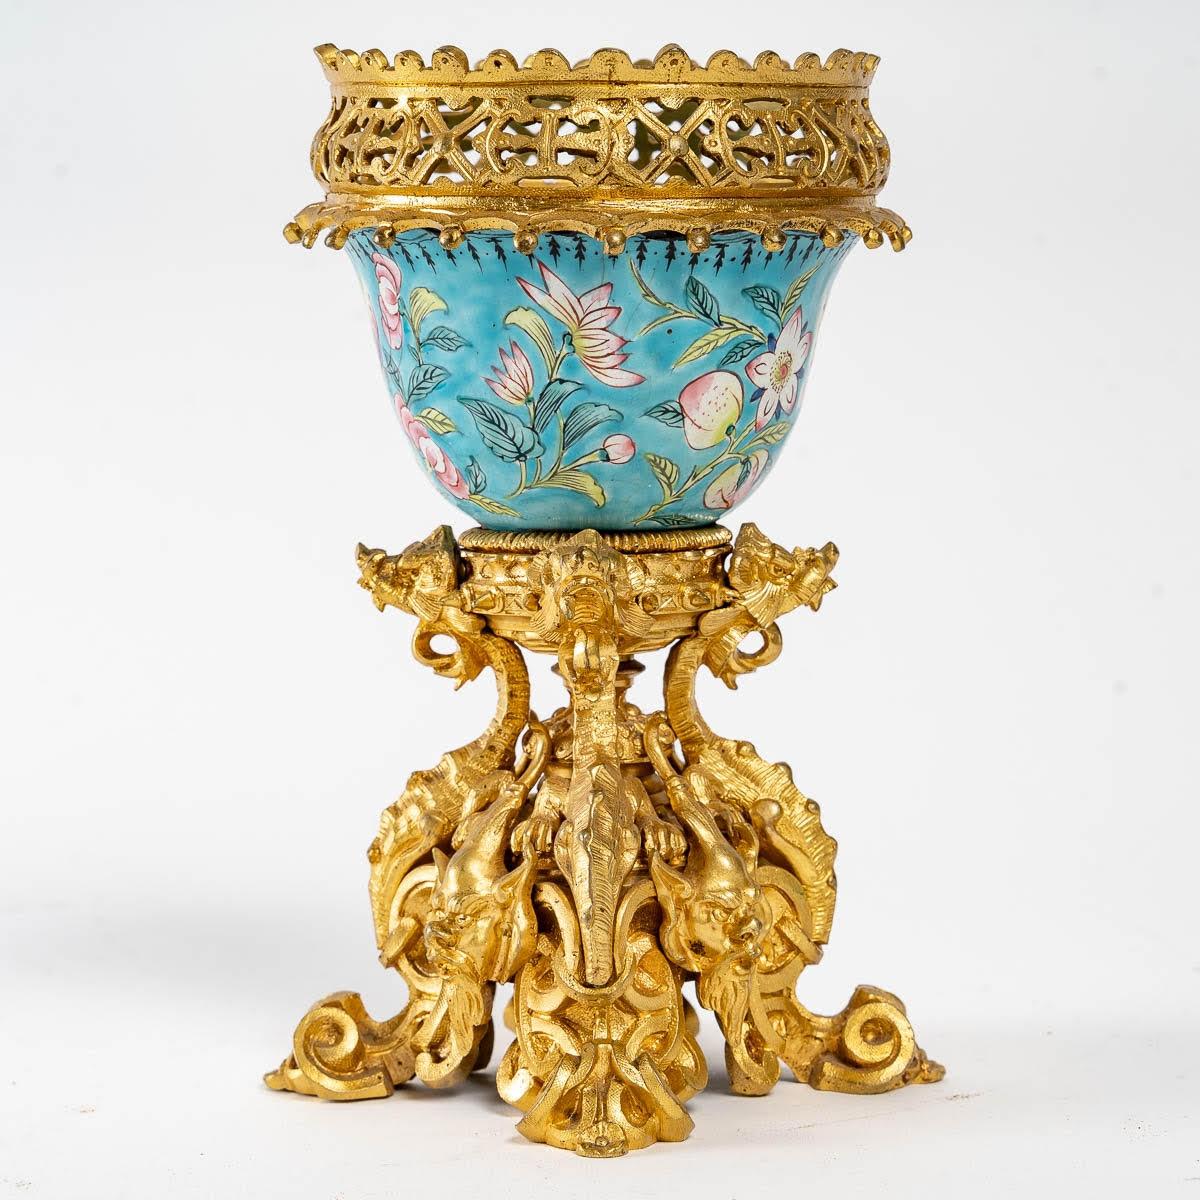 Asian Art Porcelain and Chased and Gilt Bronze Bowl, 19th century.

Asian Art porcelain vase, cup and chased and gilded bronze frame from the Napoleon III period, 19th century.

Dimensions: h: 19.5cm, d: 10.5cm